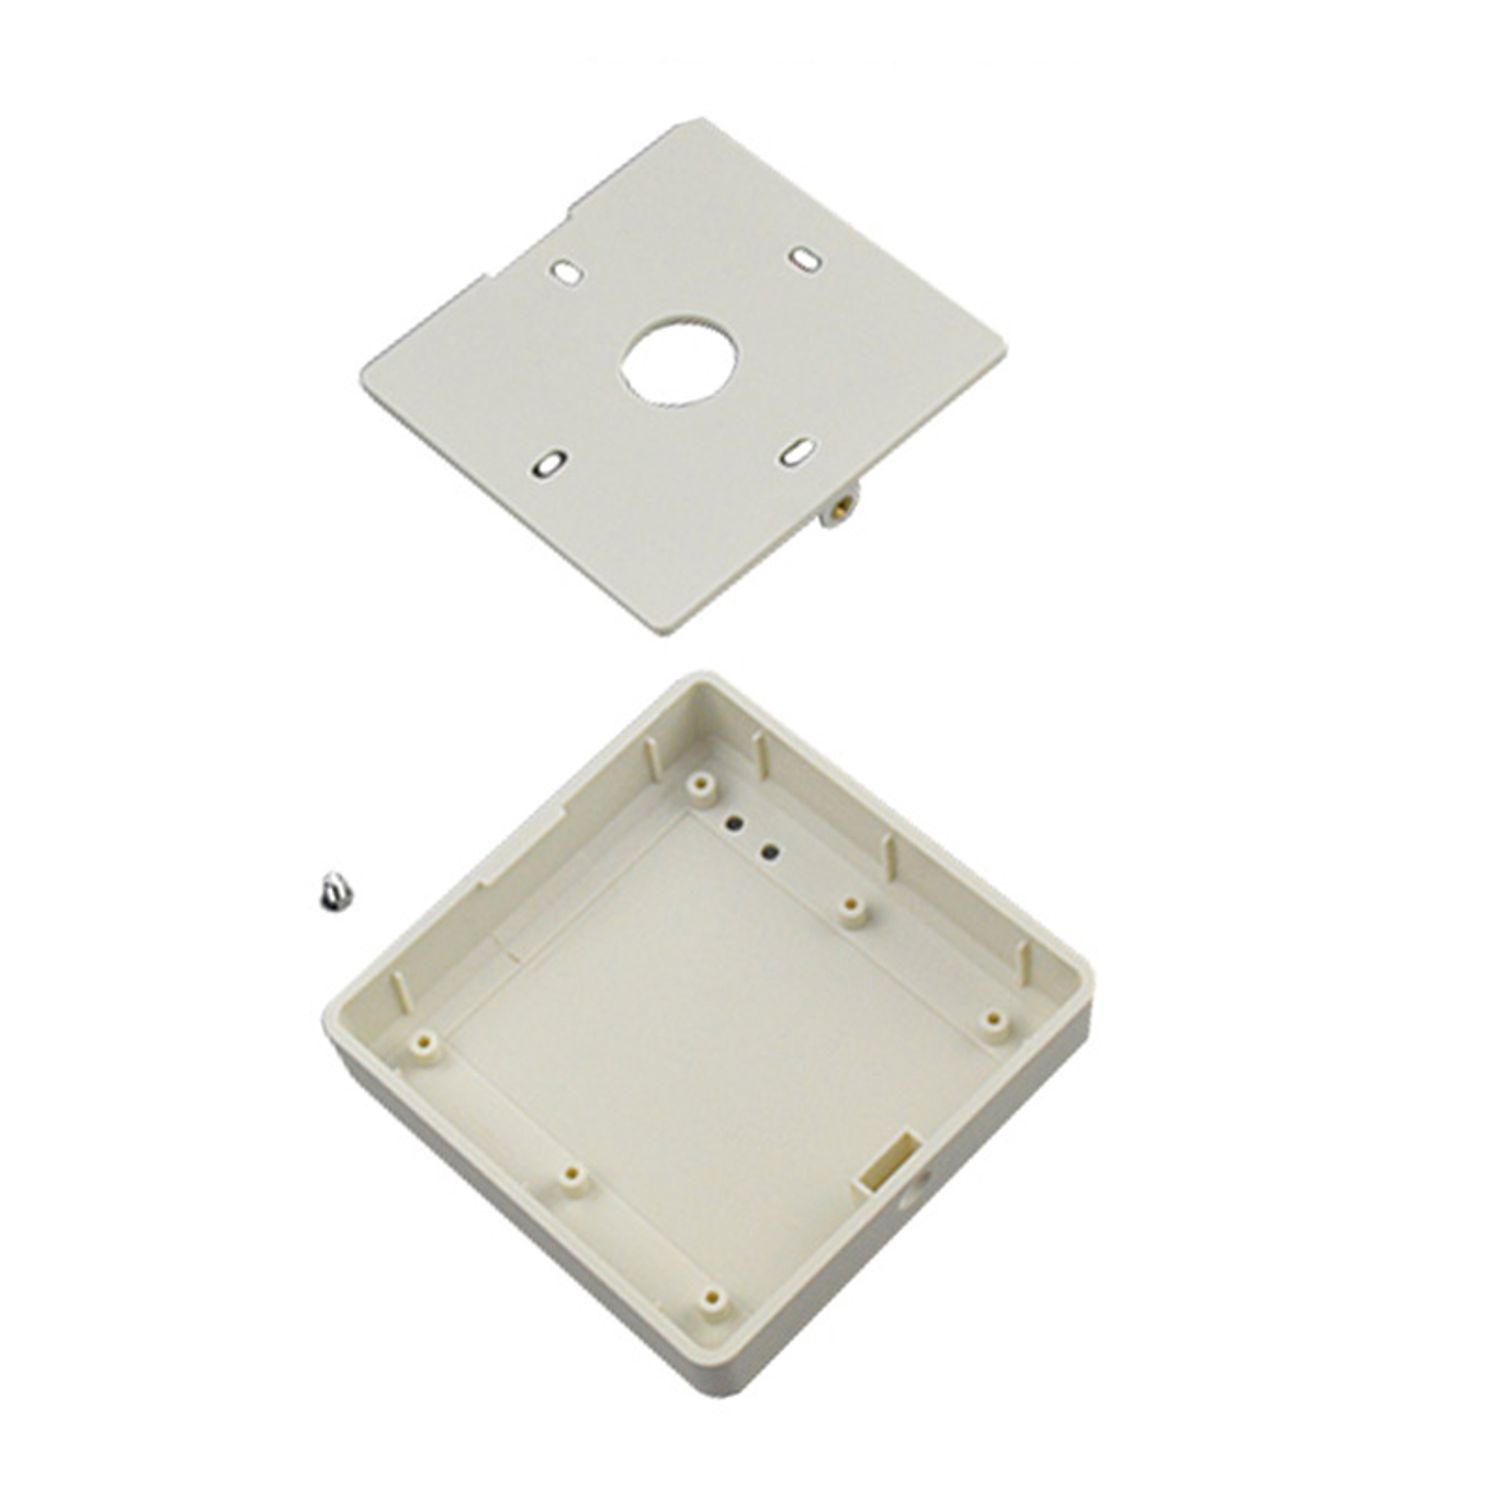 Sperate part of Plastic Control Panel Box for Wi-Fi Room Energy Management System